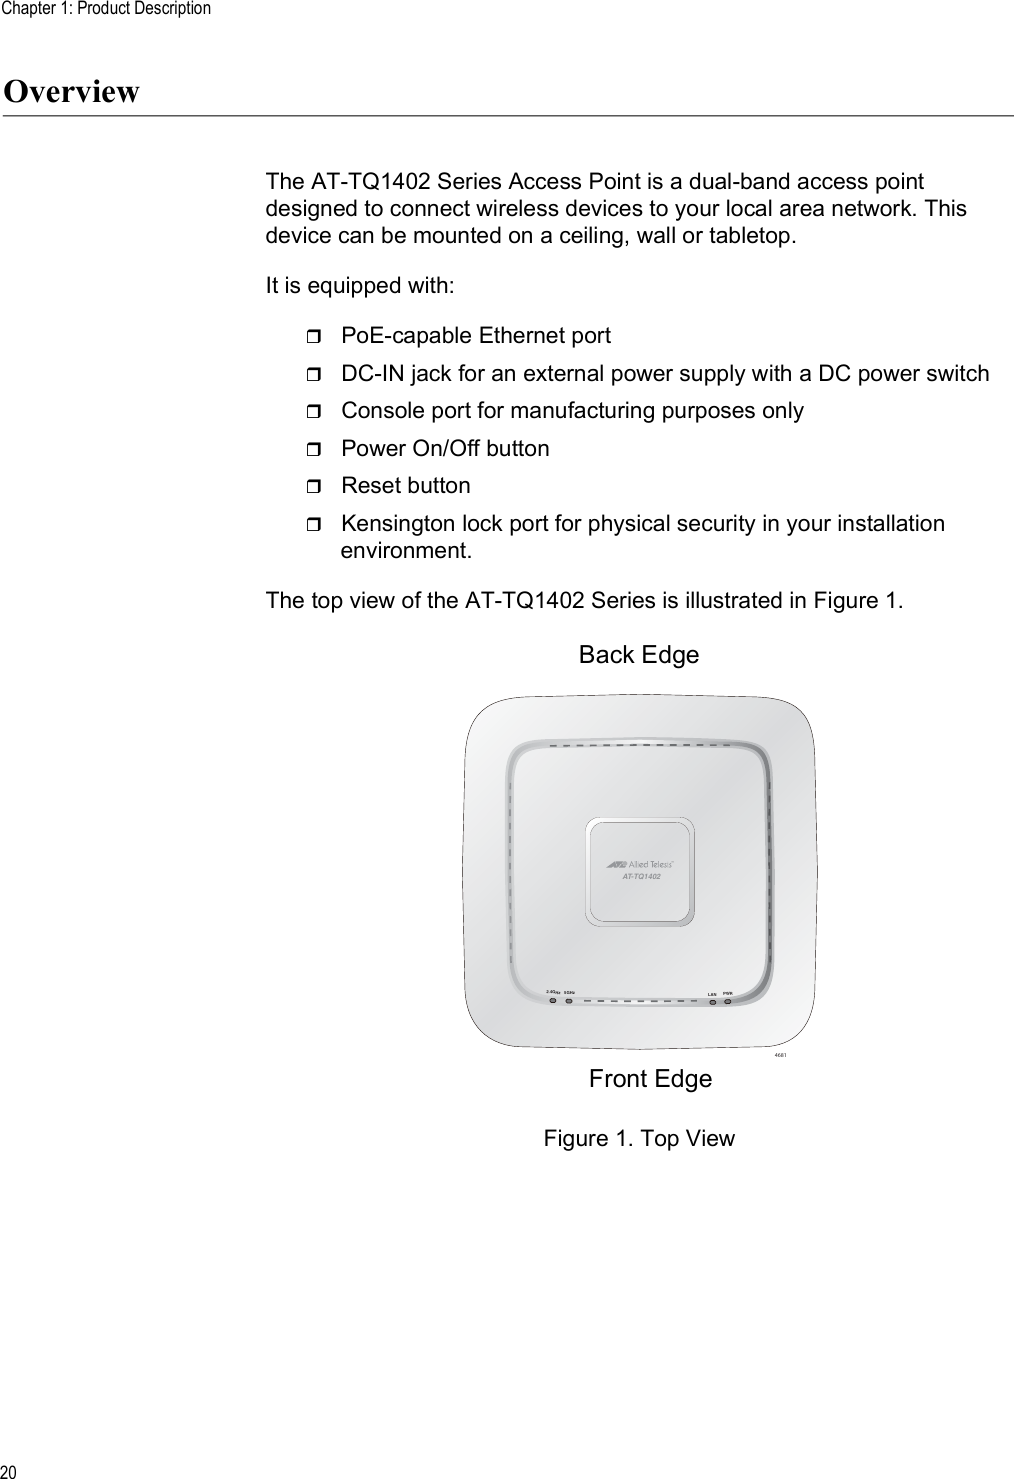 Chapter 1: Product Description20OverviewThe AT-TQ1402 Series Access Point is a dual-band access point designed to connect wireless devices to your local area network. This device can be mounted on a ceiling, wall or tabletop. It is equipped with:PoE-capable Ethernet portDC-IN jack for an external power supply with a DC power switch Console port for manufacturing purposes onlyPower On/Off buttonReset buttonKensington lock port for physical security in your installation environment. The top view of the AT-TQ1402 Series is illustrated in Figure 1.Figure 1. Top View46815GHz2.4GHzPWRLANAT-TQ1402Front EdgeBack Edge